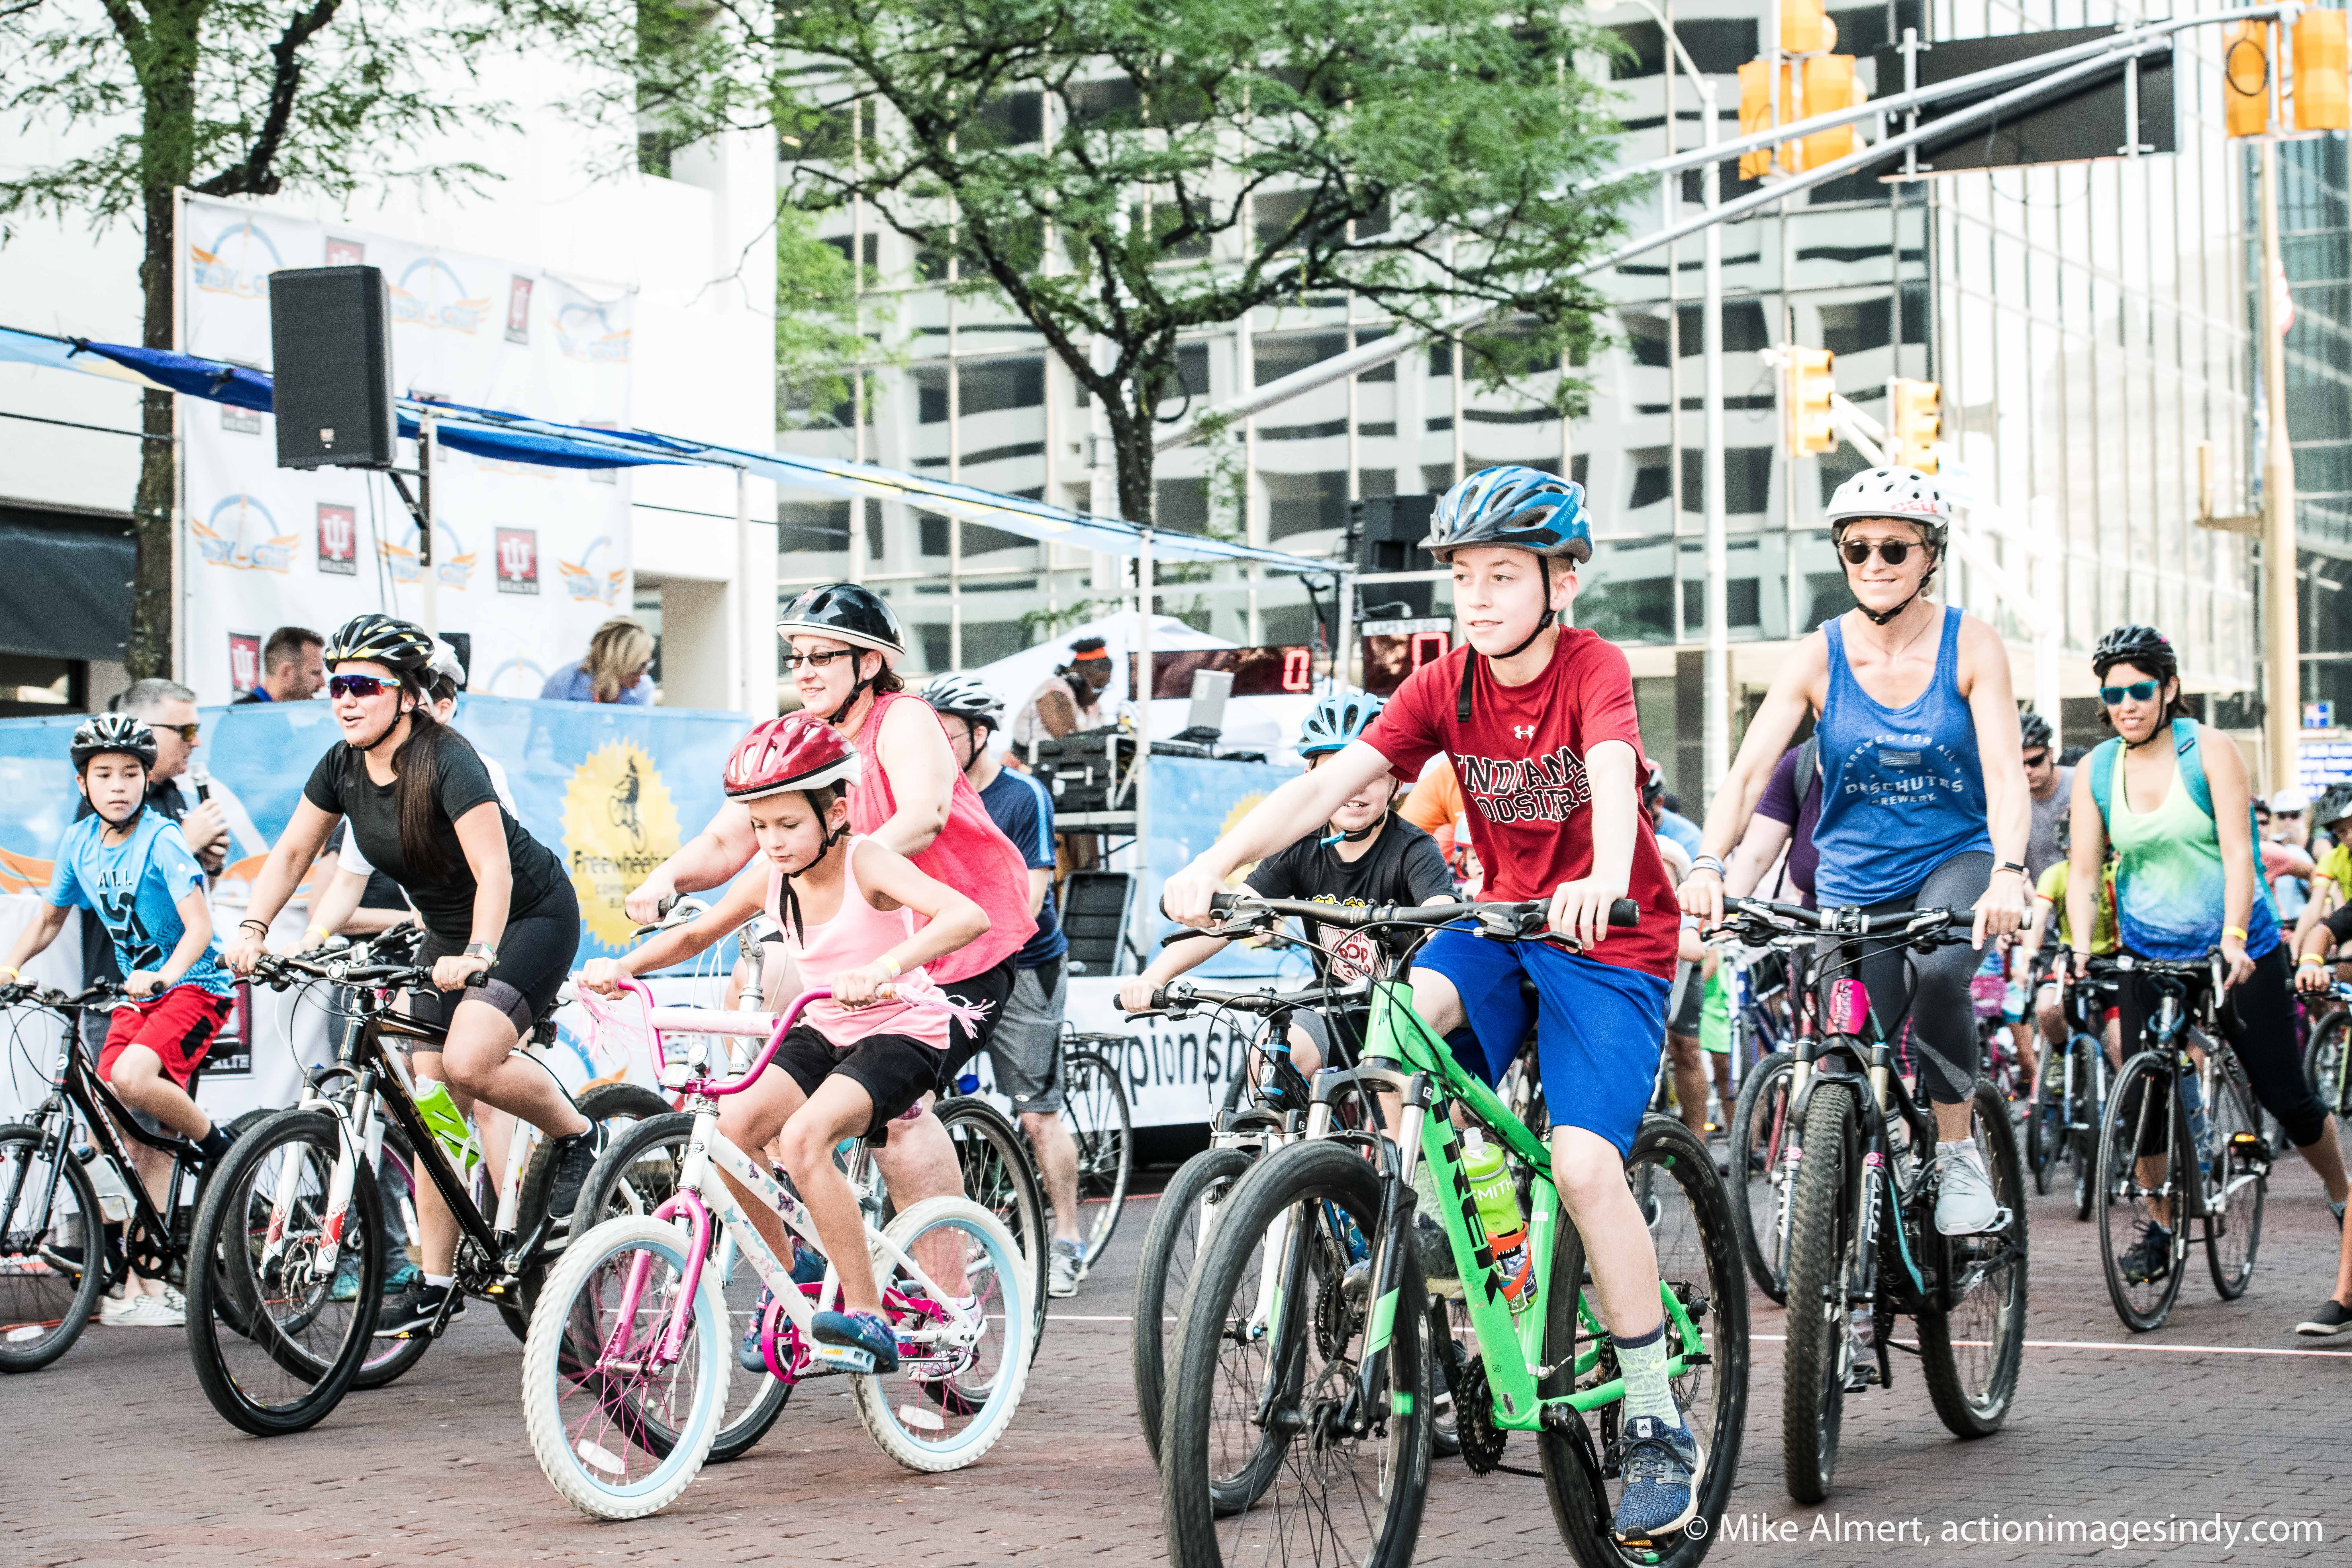 Free Family Fun at the IU Health Indy Crit Bicycle Festival